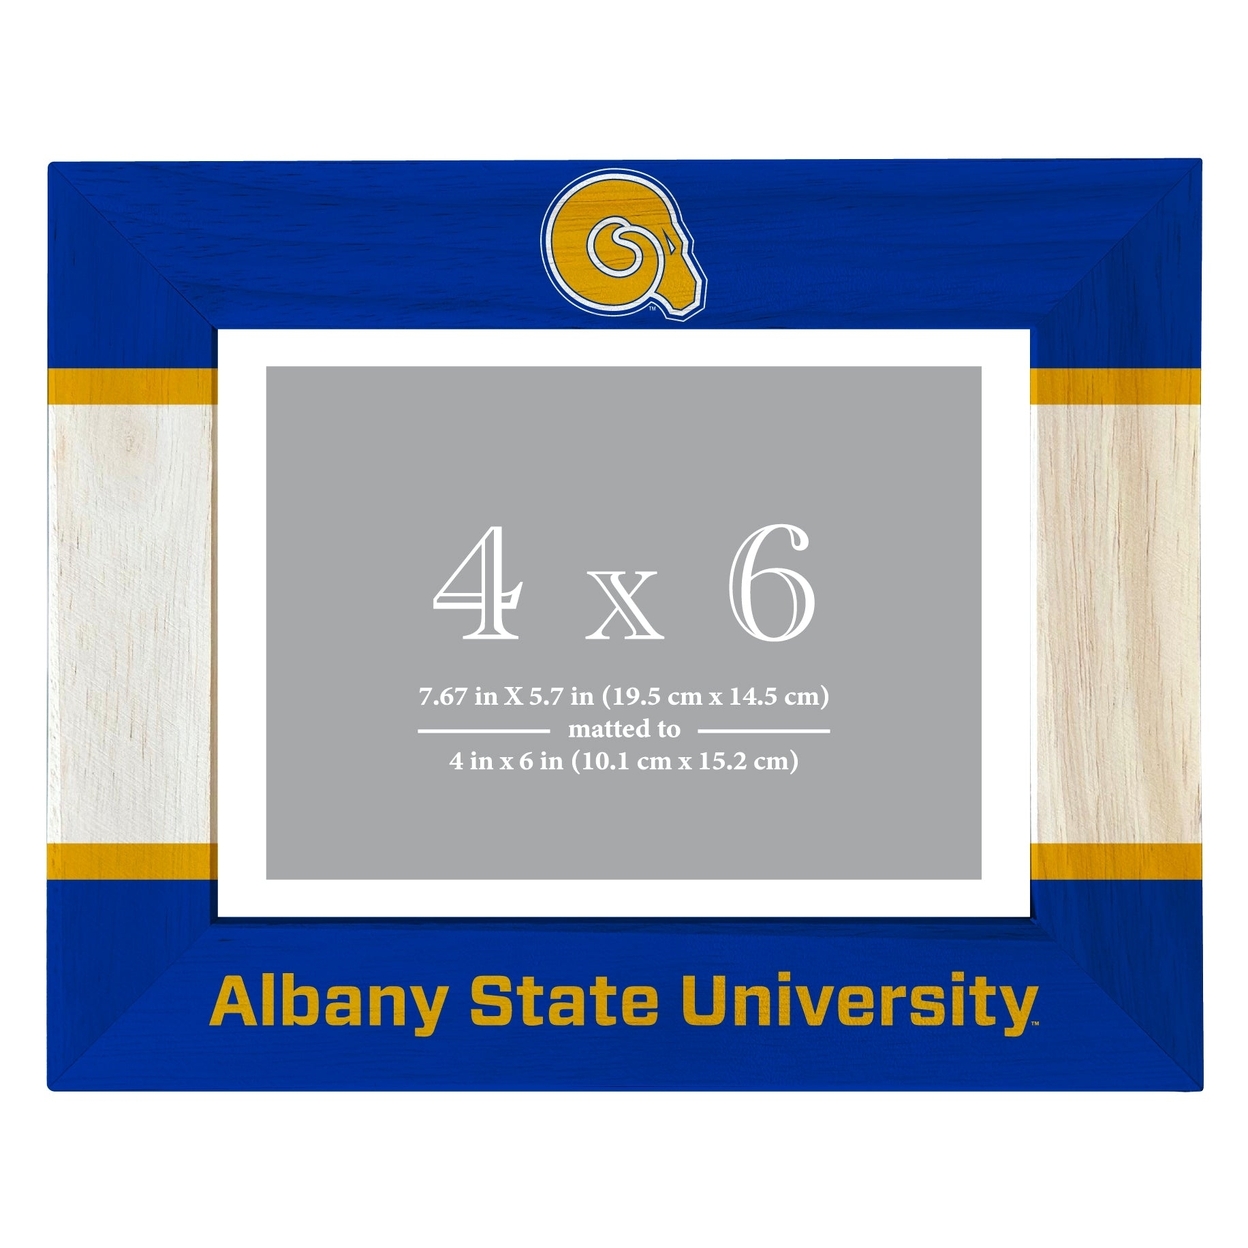 Albany State University Wooden Photo Frame Matted To 4 X 6 Inch - Printed